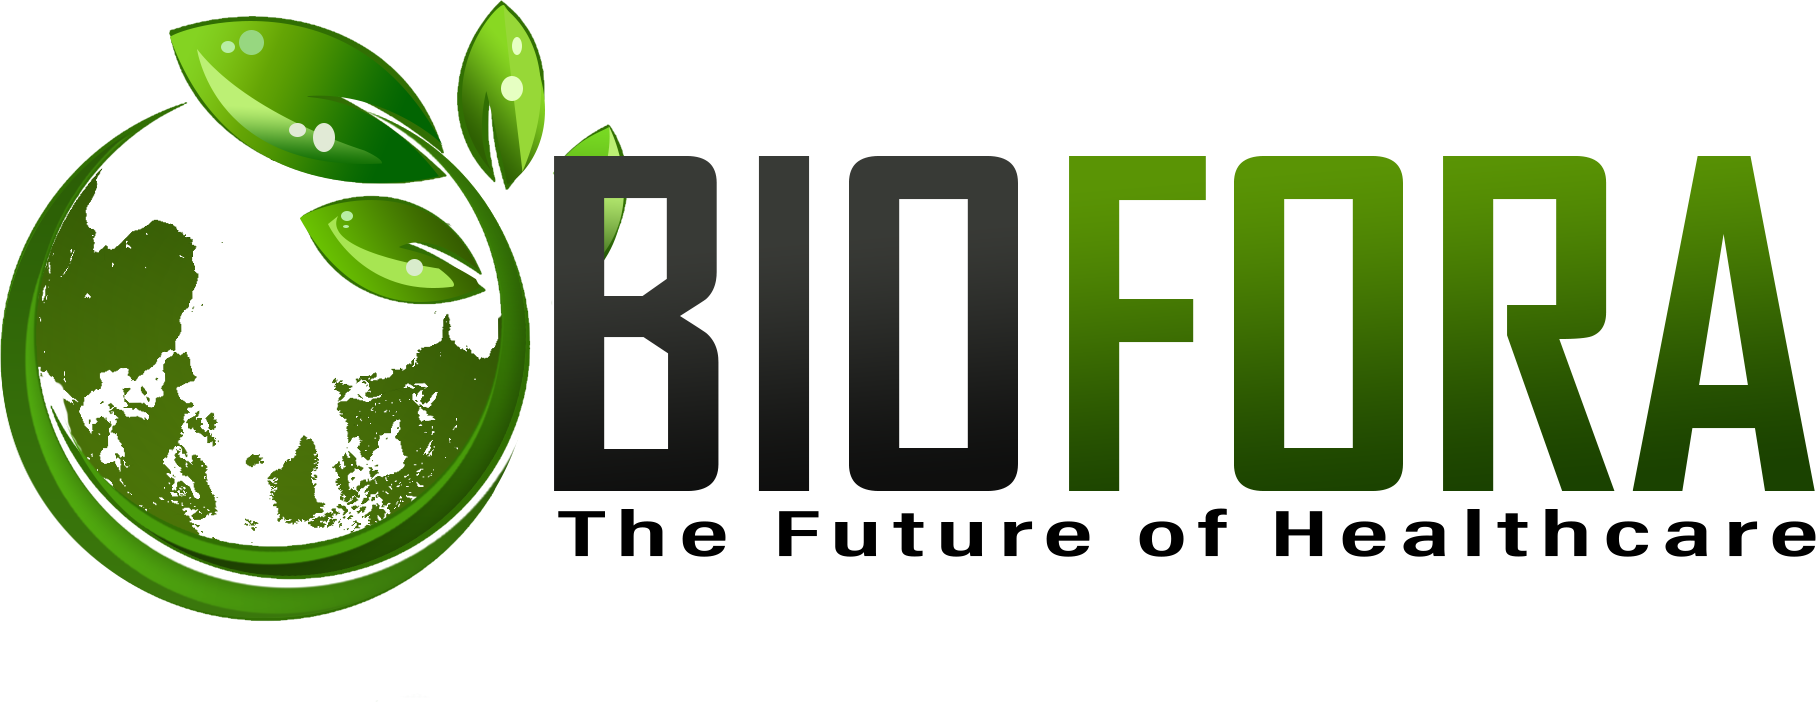 Biofora- World Conference and Expo on Anesthesiology and Critical Care